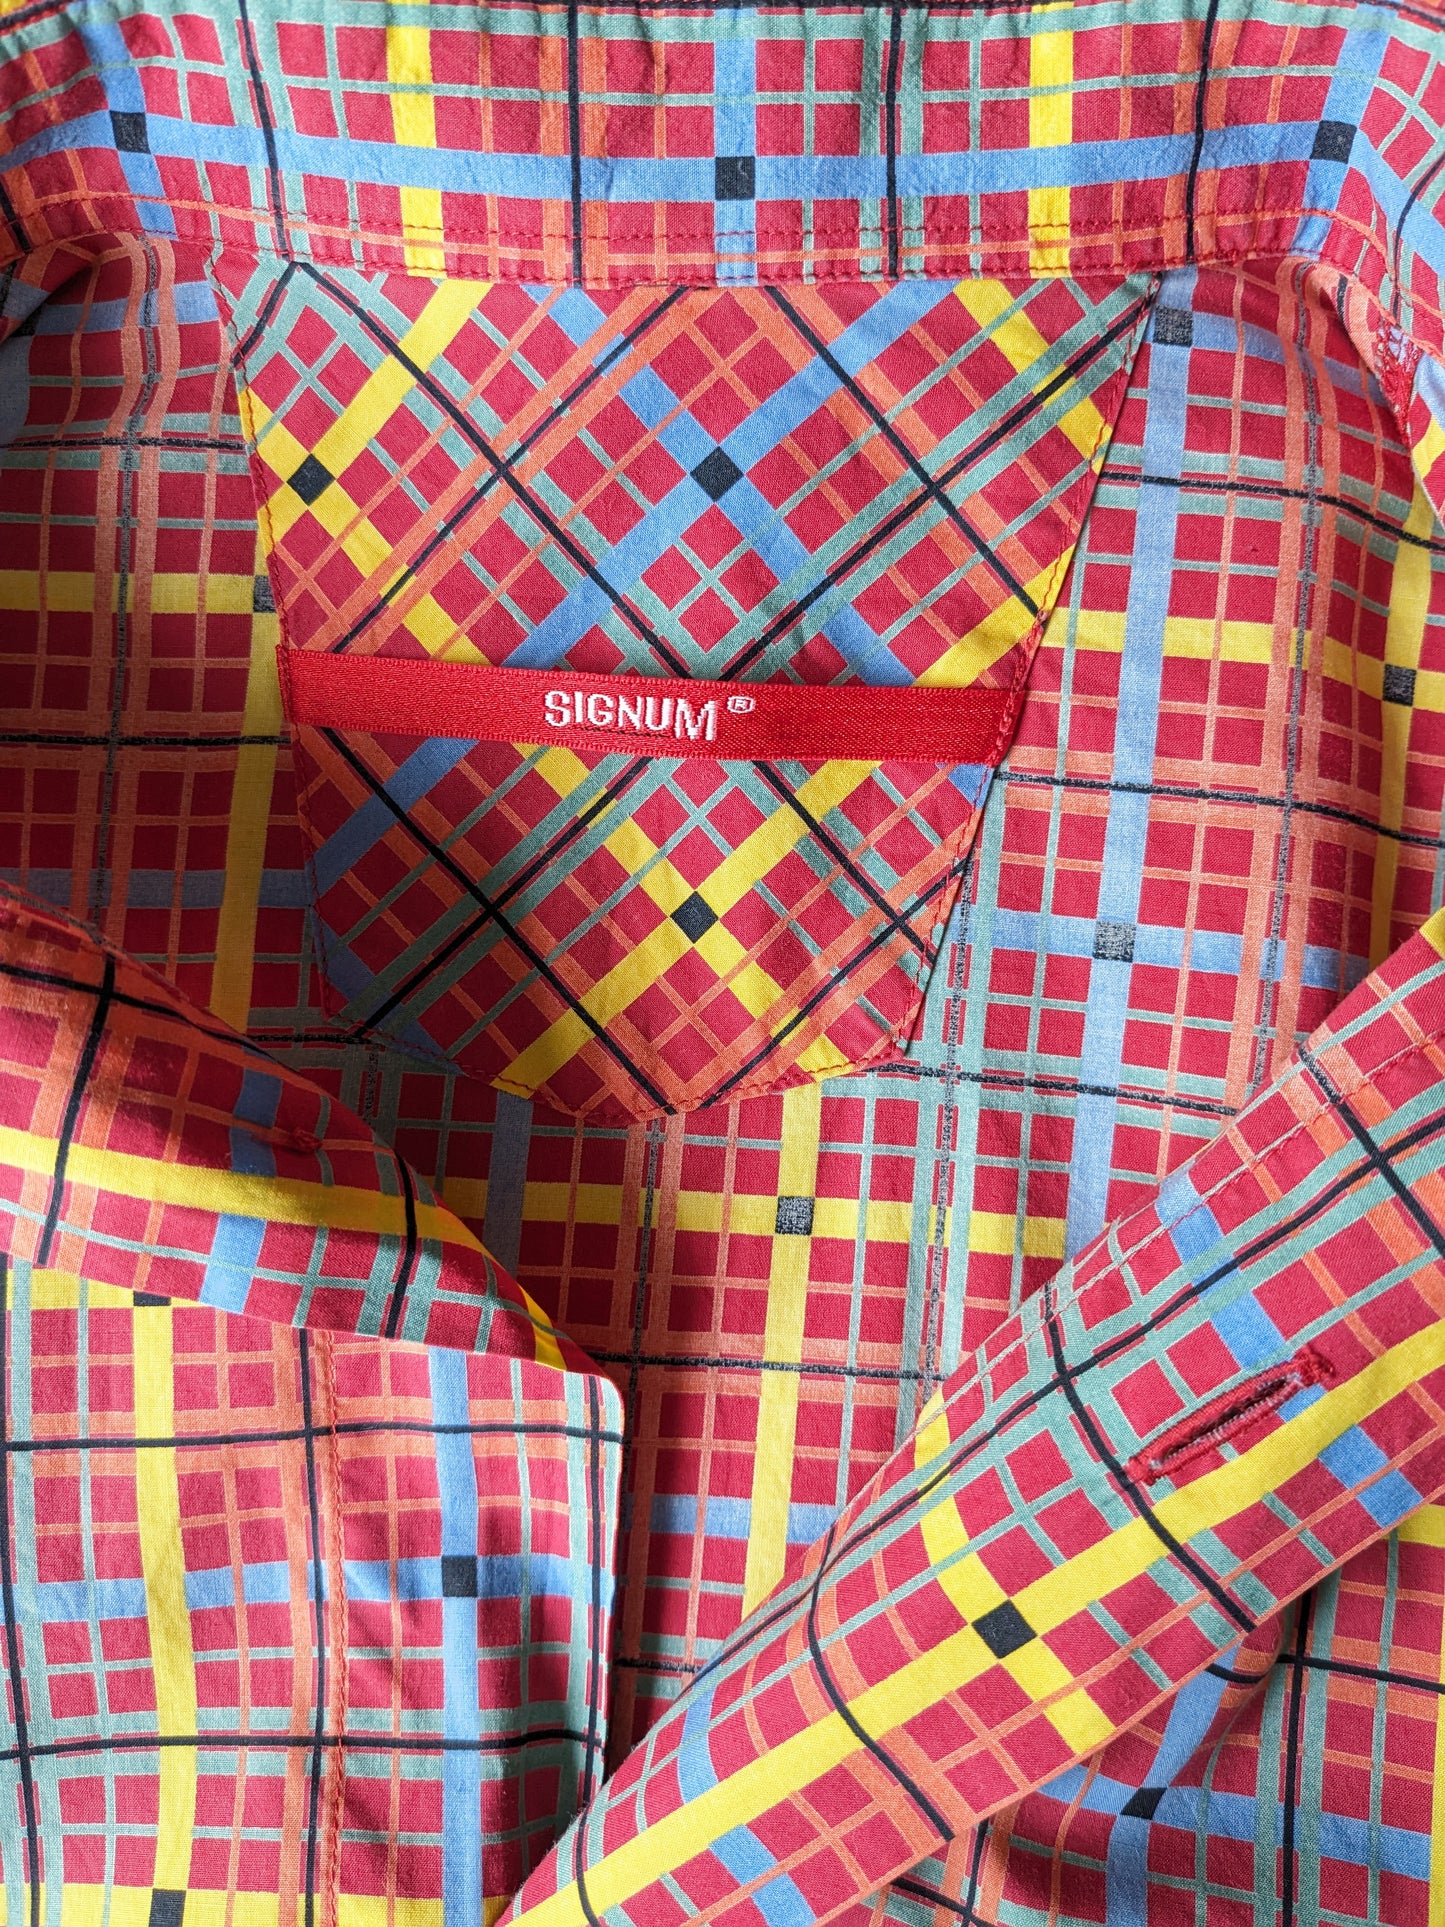 Vintage signum shirt short sleeve, larger buttons. Orange red blue yellow checked. Size XL.